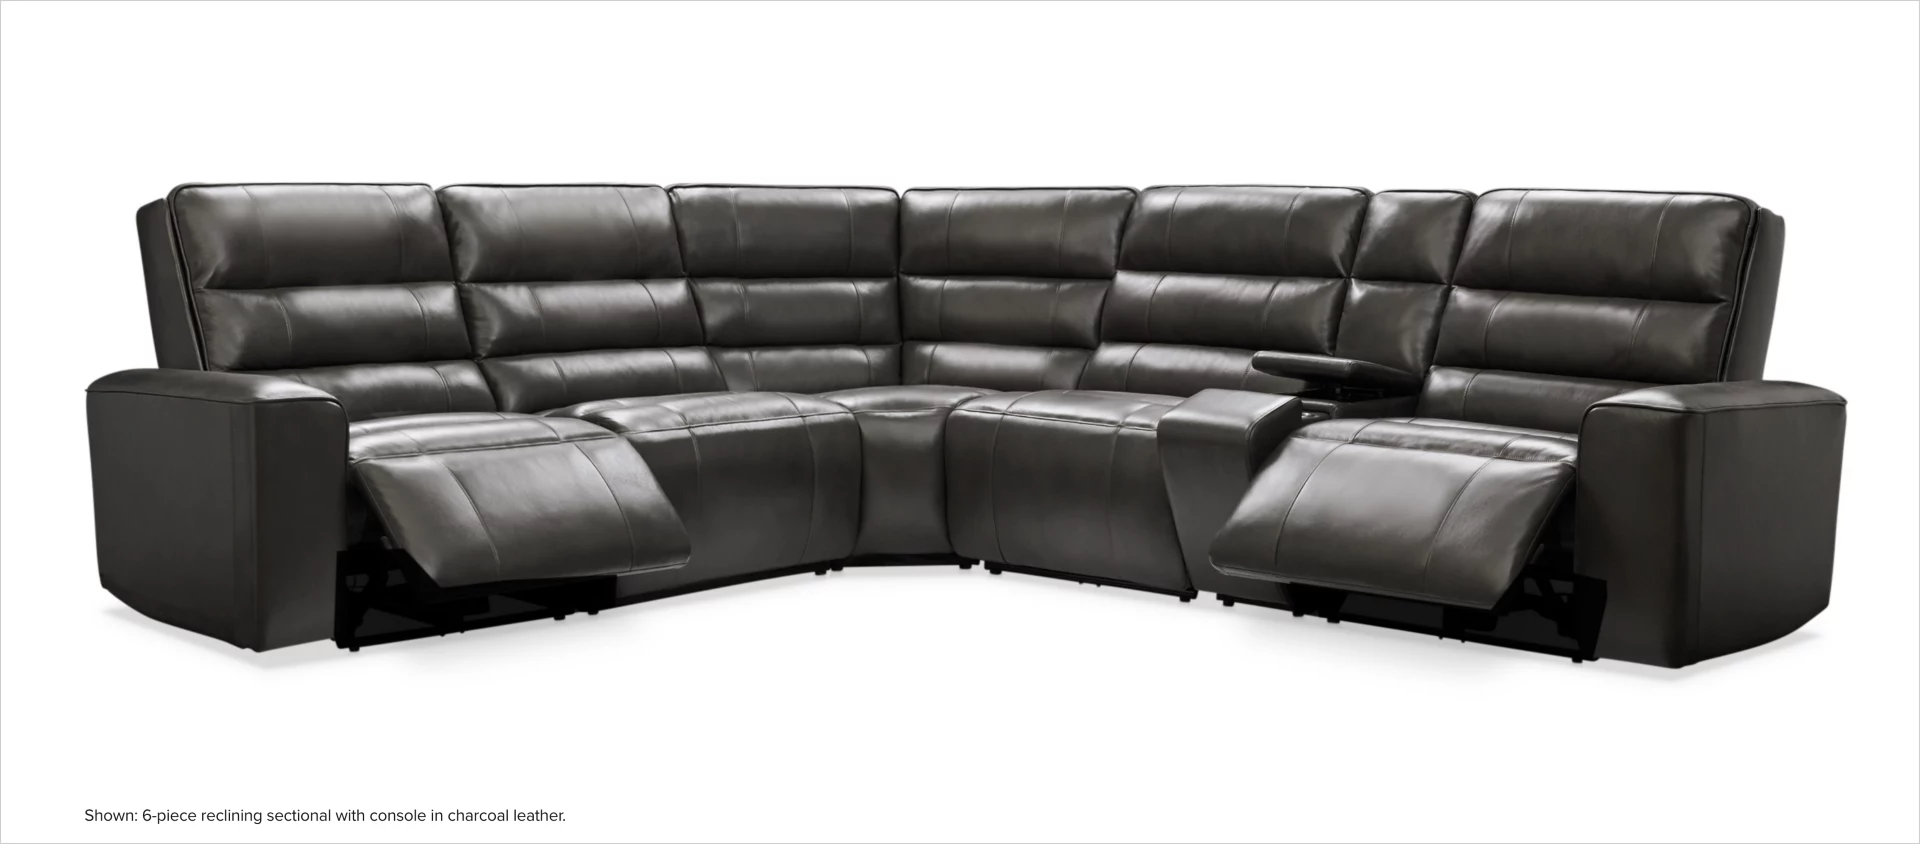 Hartley 6-piece reclining sectional with console in chocolate leather. 